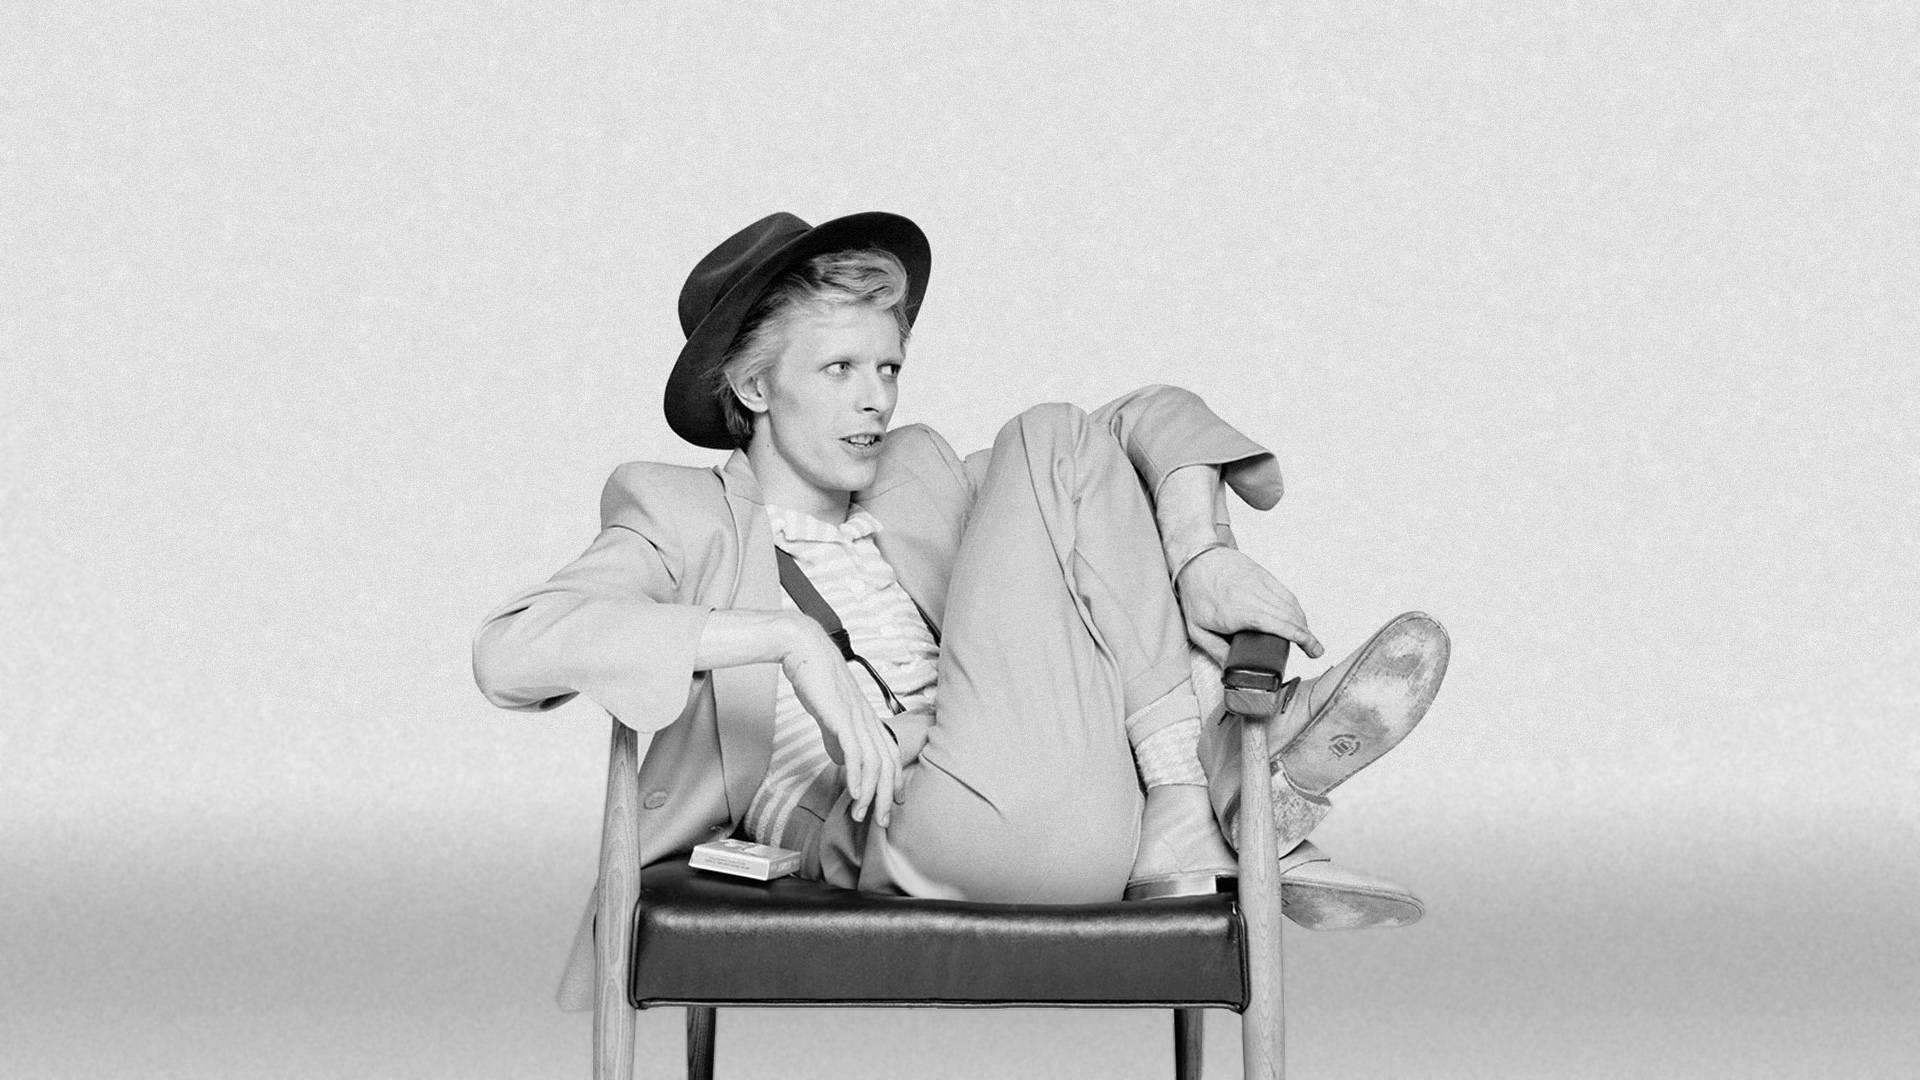 David Bowie Suit Photo Grayscale Background